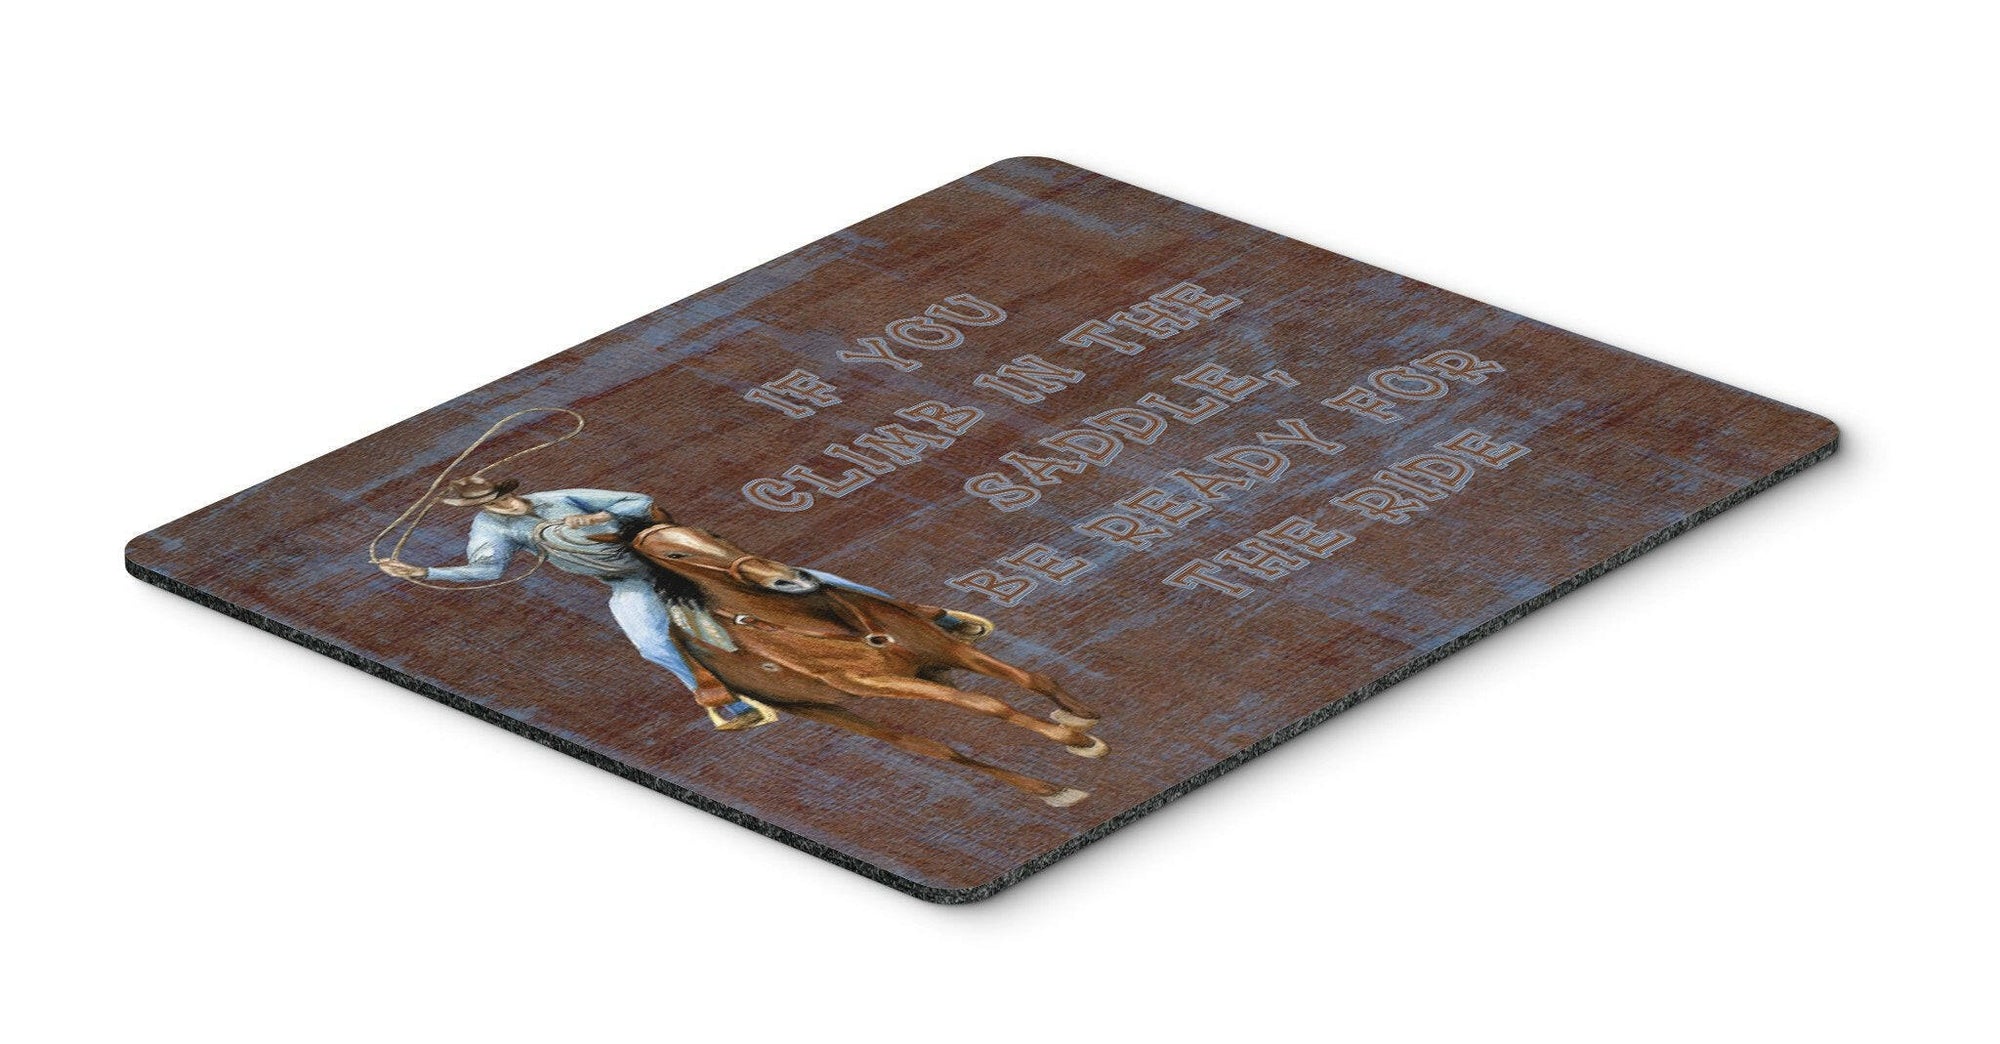 Roper Horse If you climb in the saddle, be ready for the ride Mouse Pad, Hot Pad or Trivet SB3061MP by Caroline's Treasures